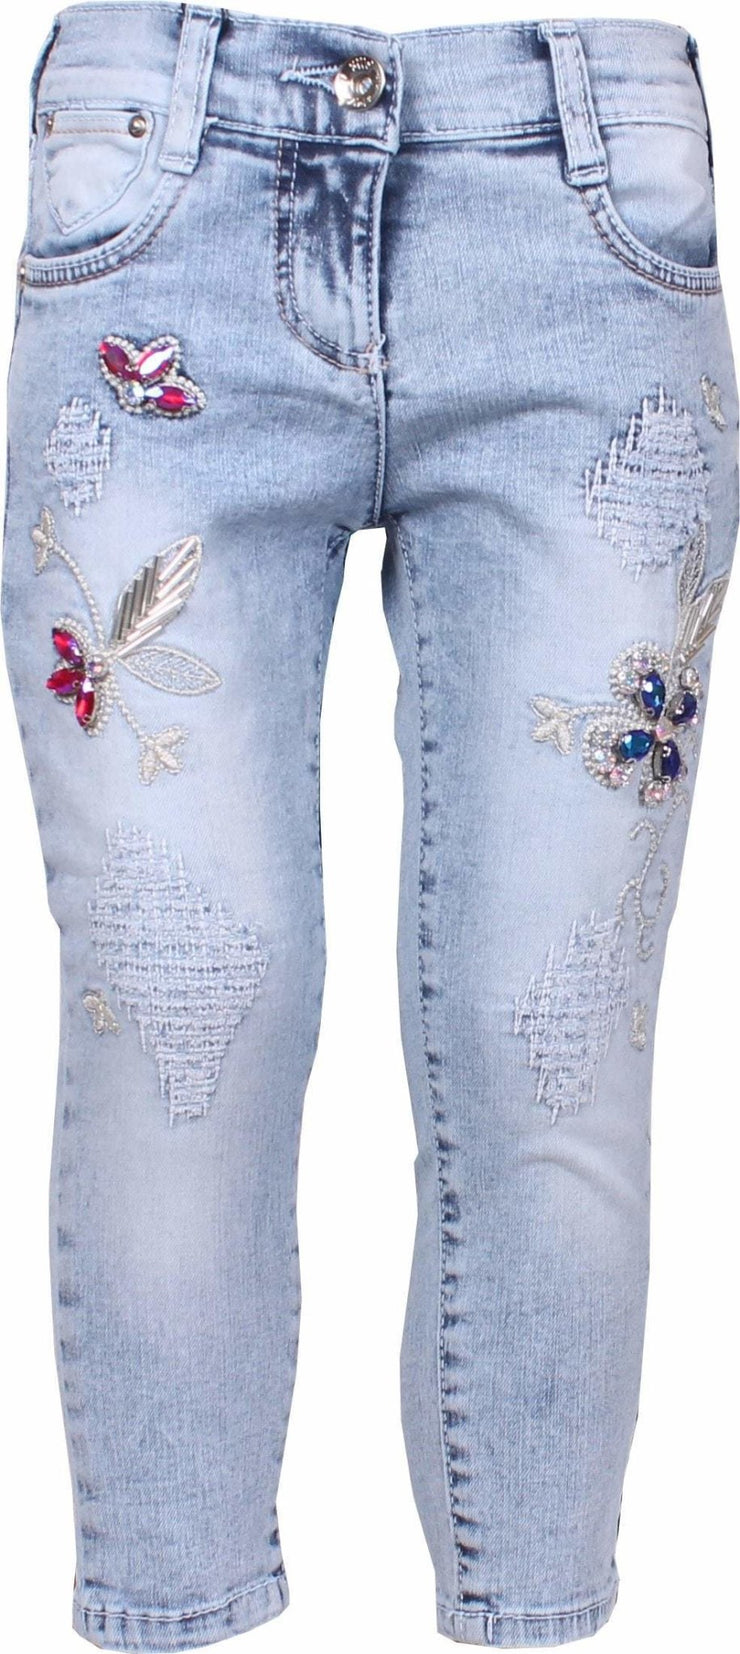 Red Flower Jeans - Elma's Clothing